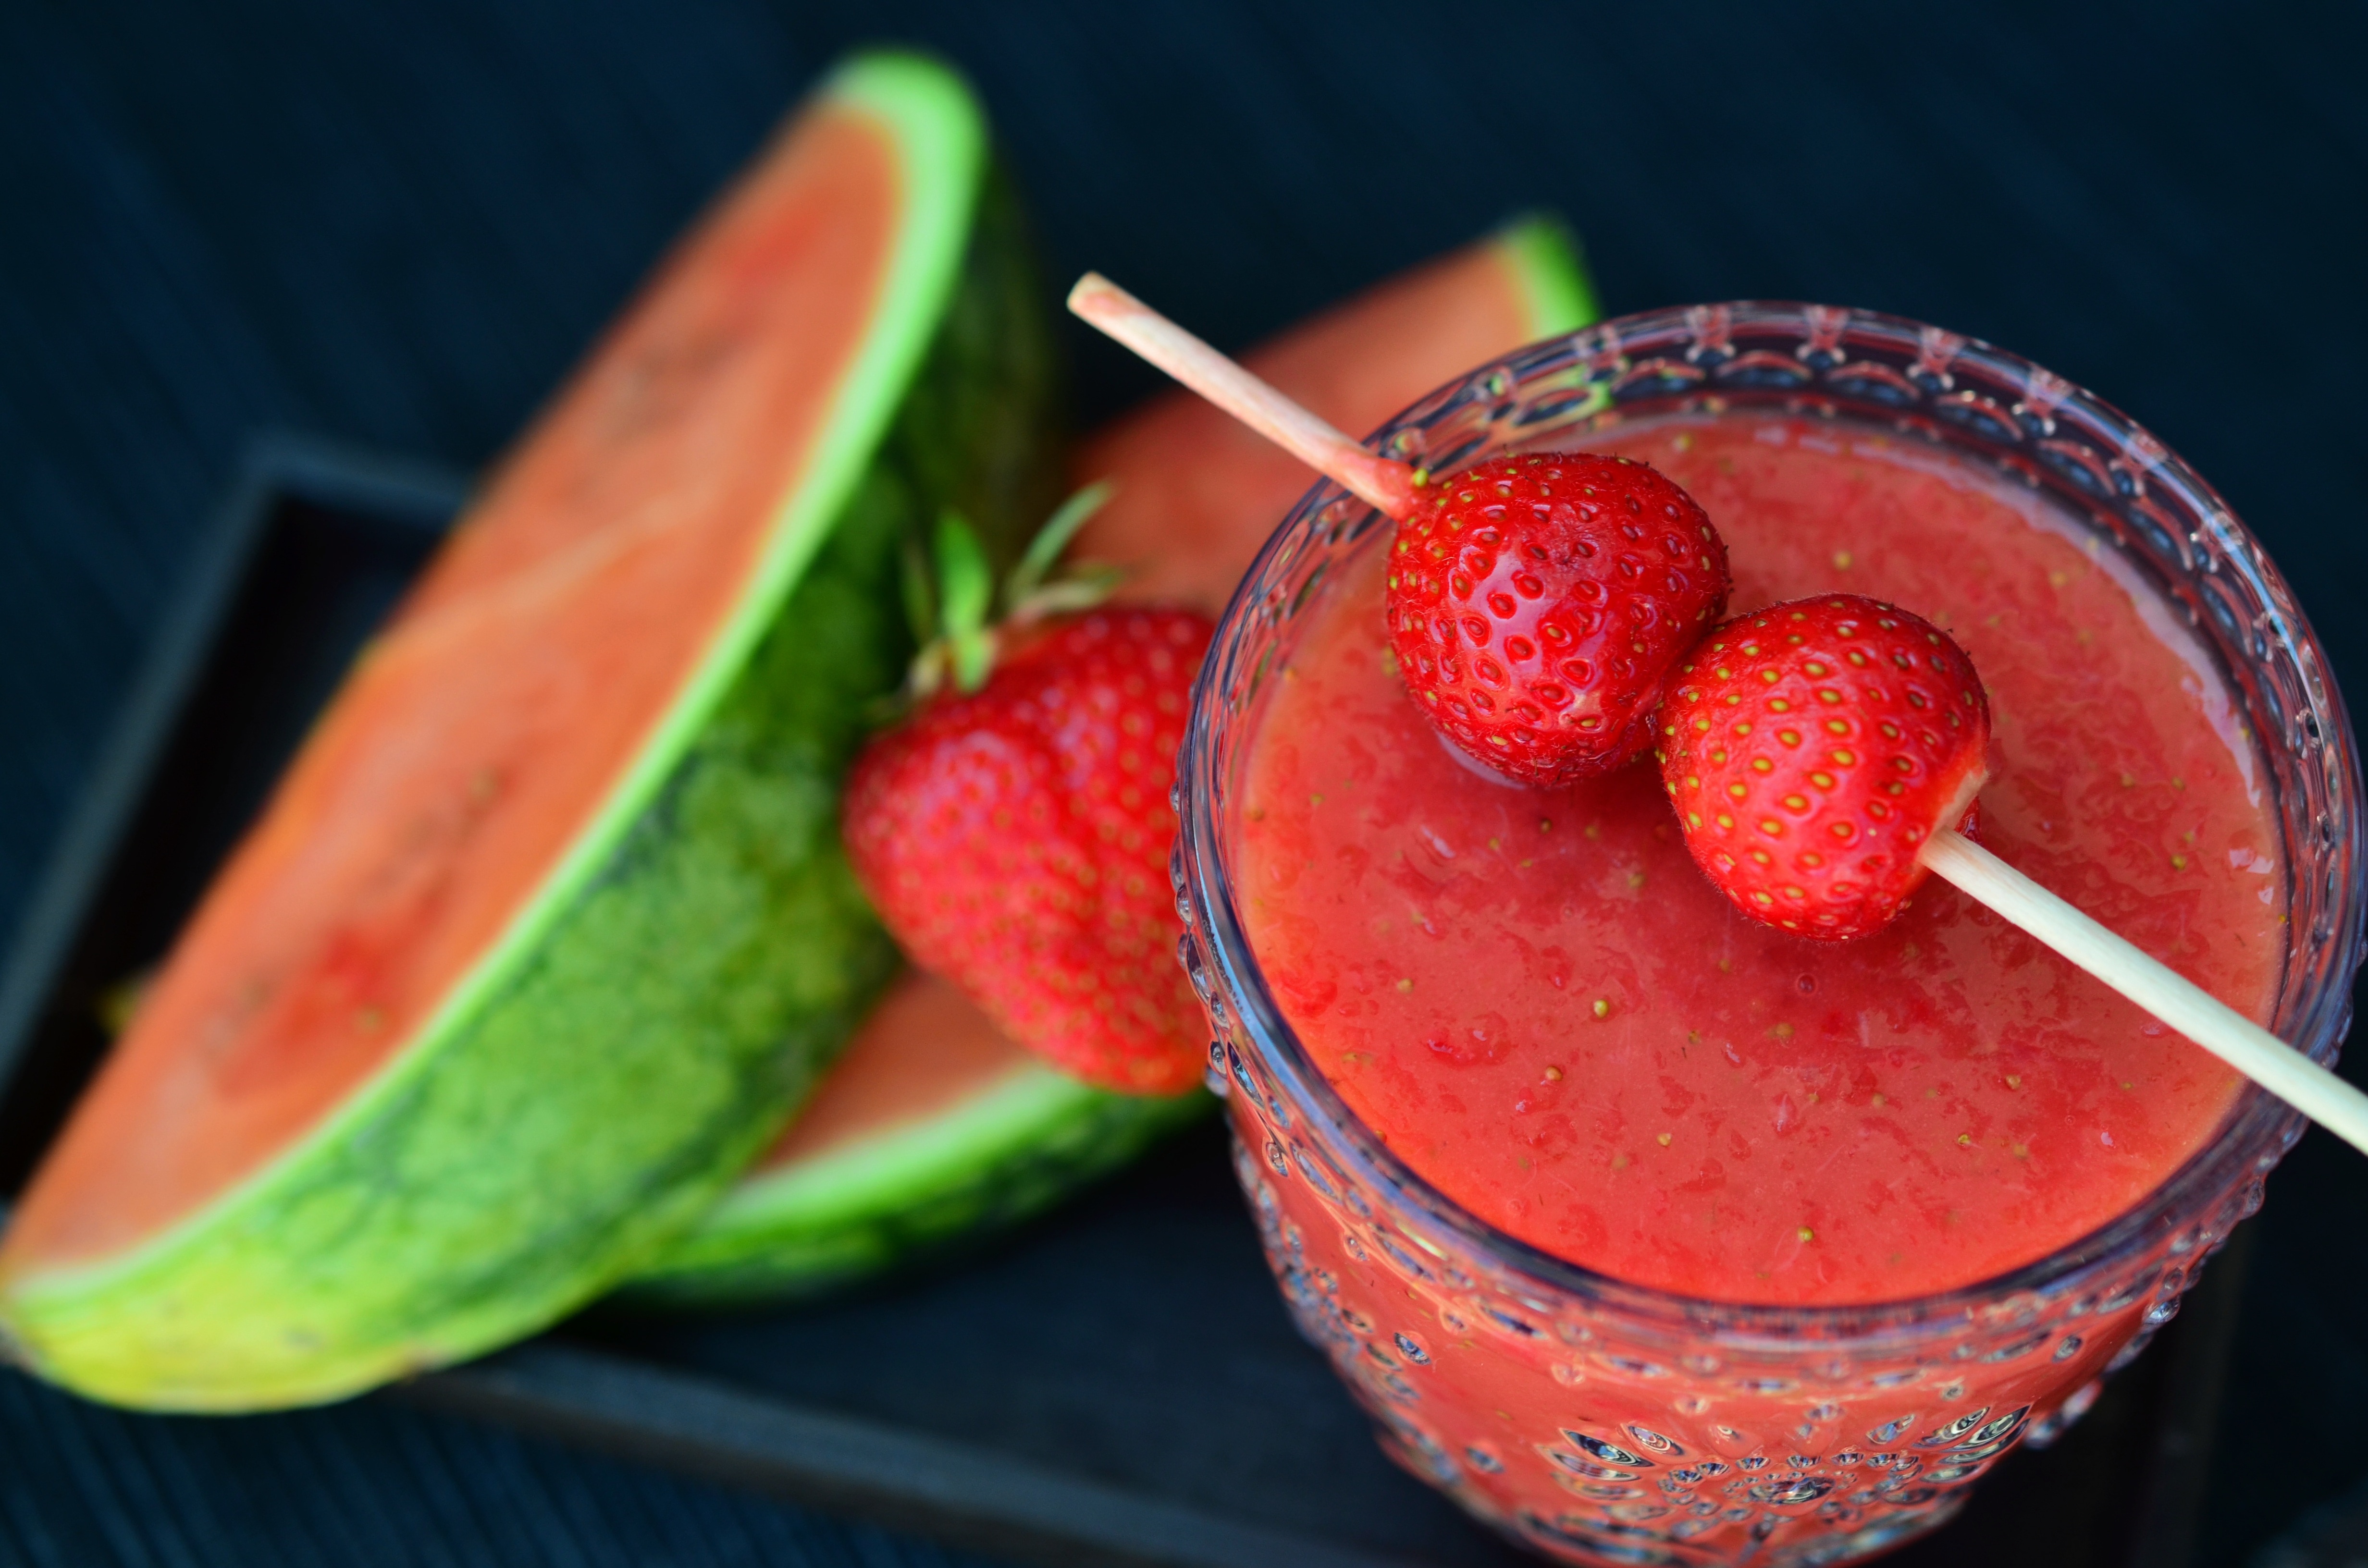 Watermelon, Smoothie, Strawberries, fruit, food and drink